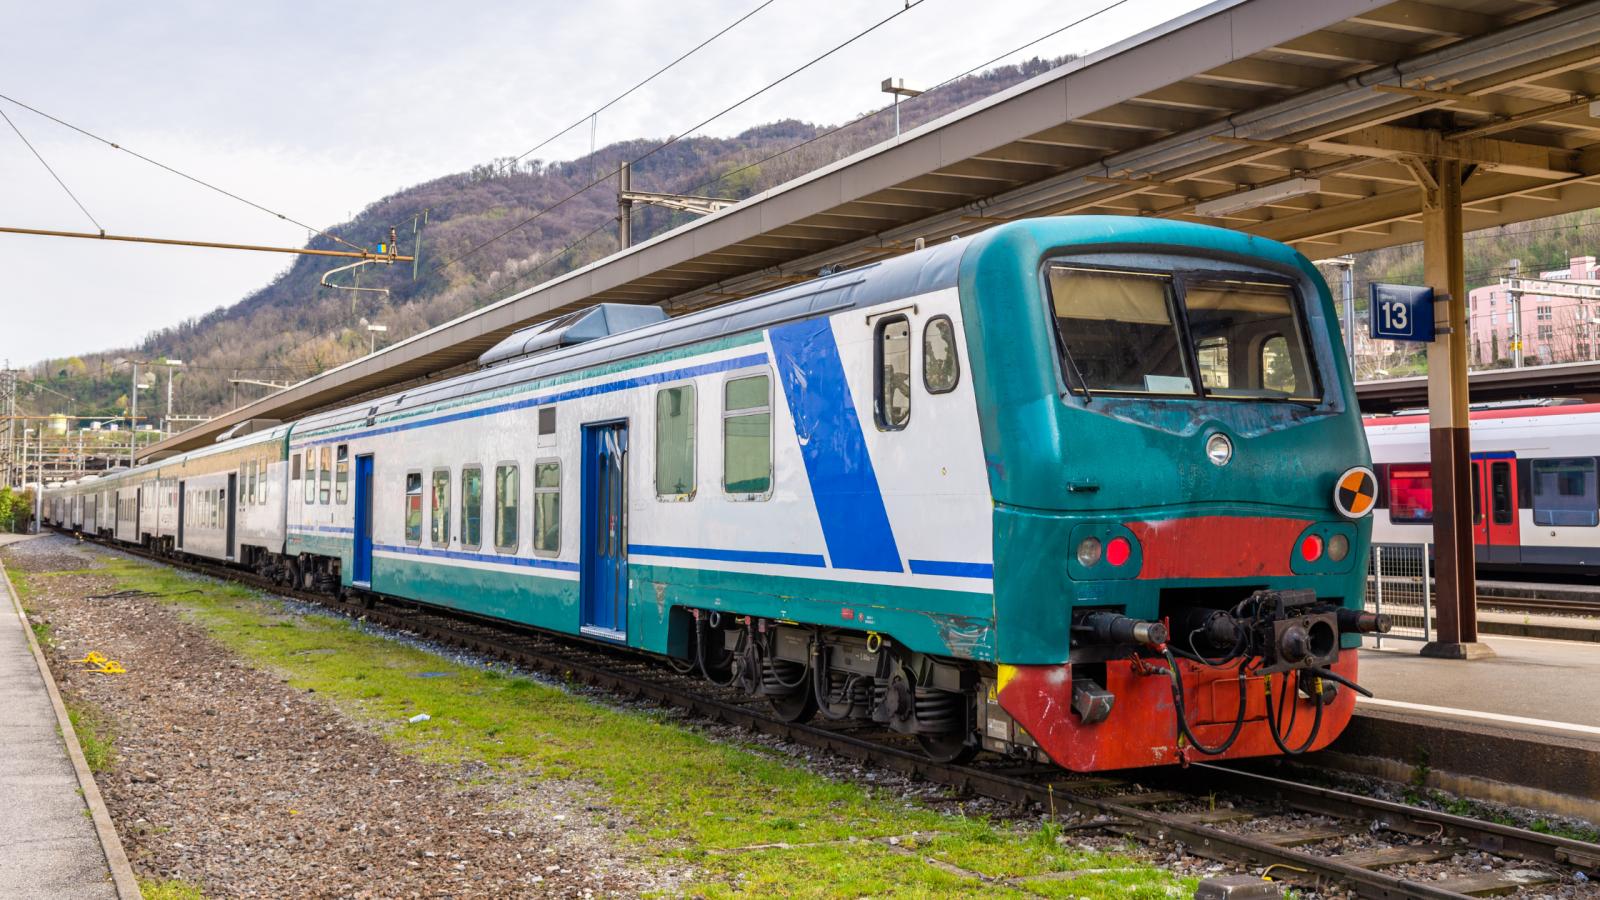 6 Key Differences Between American and European Rail Systems